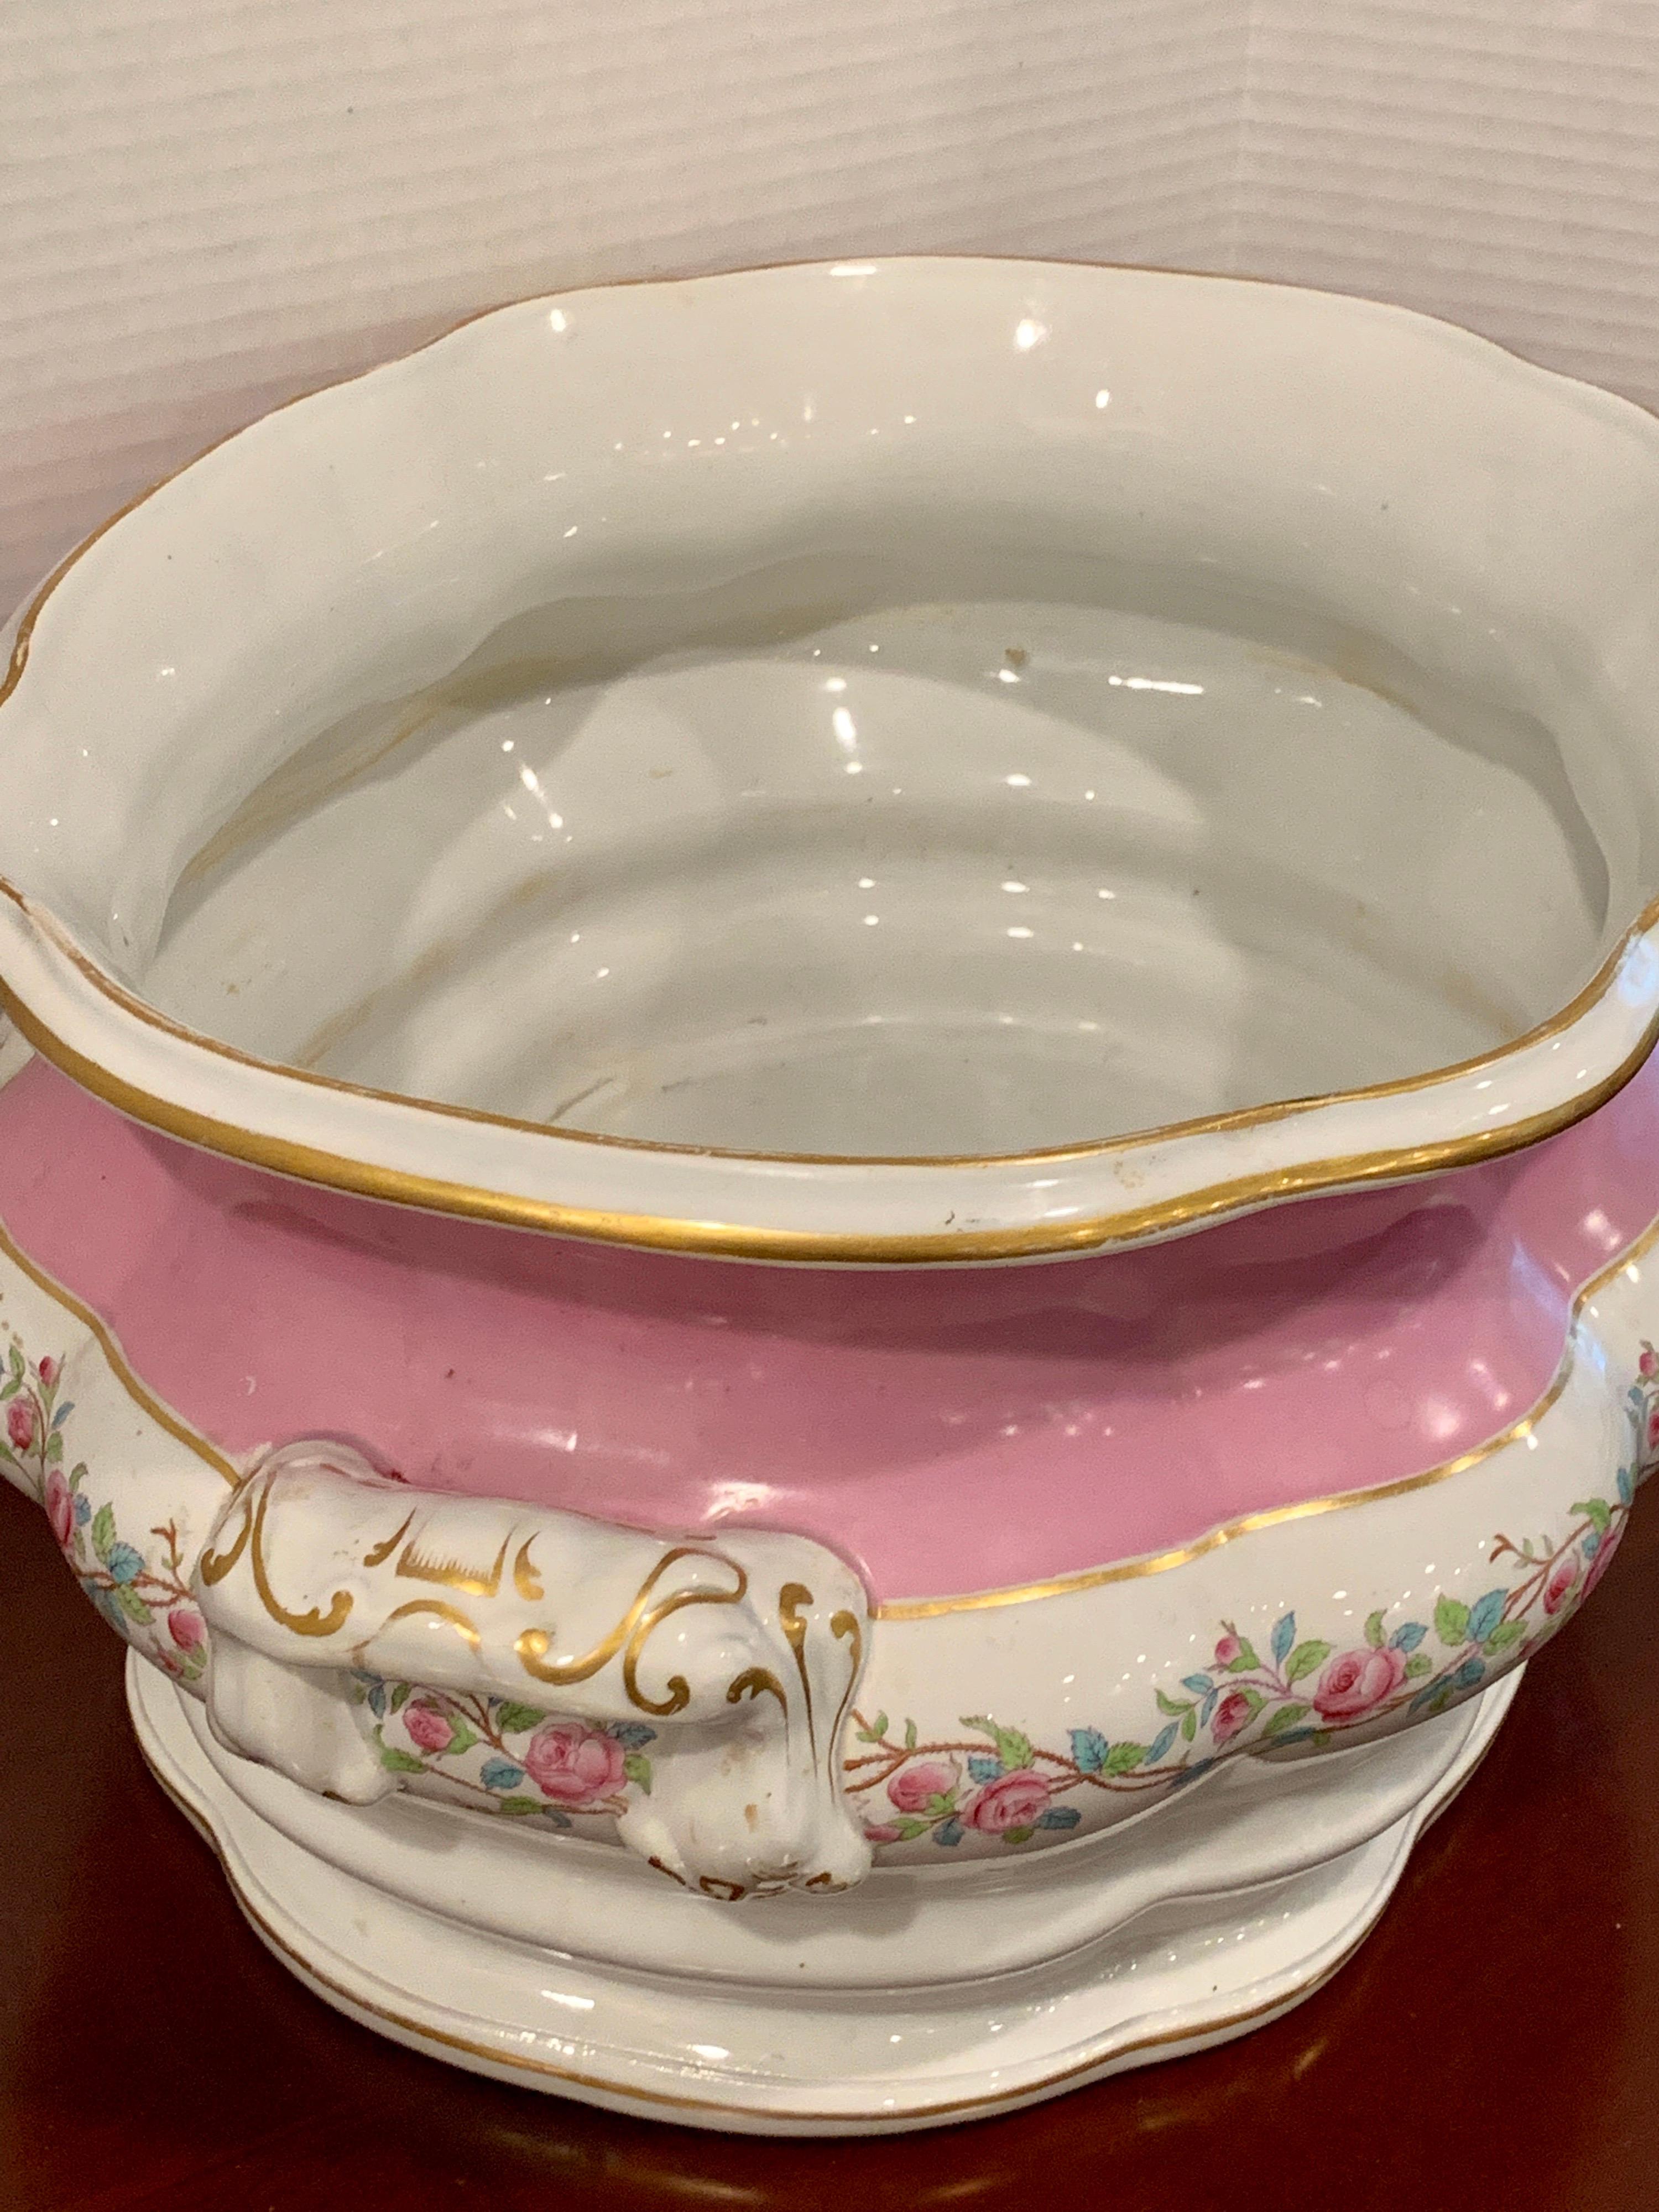 High Victorian 19th Century Pink Floral Porcelain Foot Bath, Attributed to Mintons For Sale